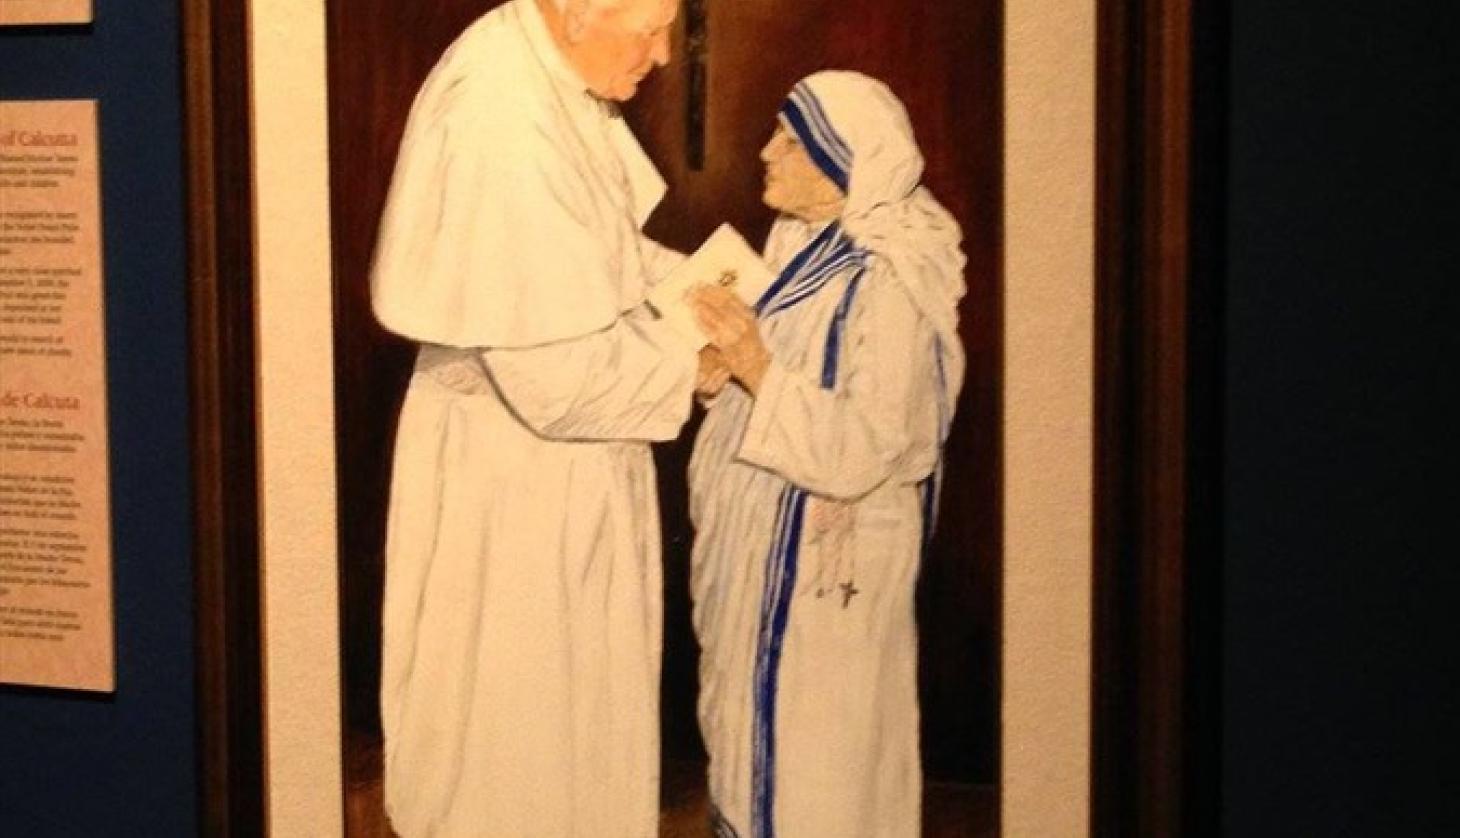 Photo of the Meeting of Pope John Paul with Mother Teresa